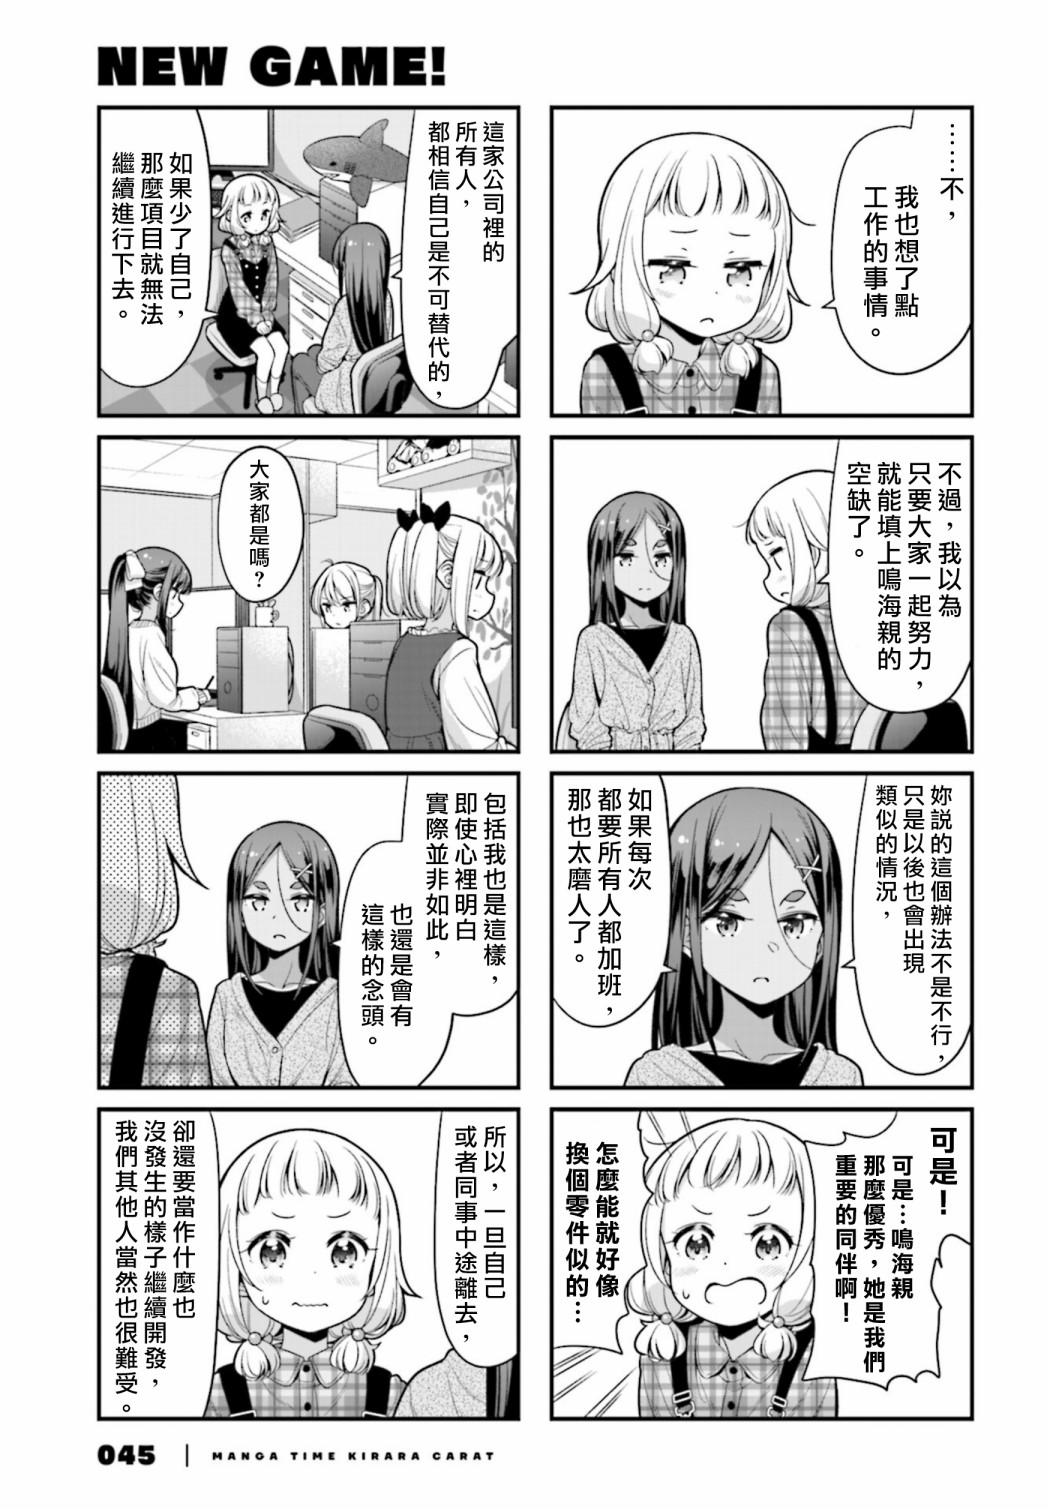 NEW GAME! - 131 第131話 - 1